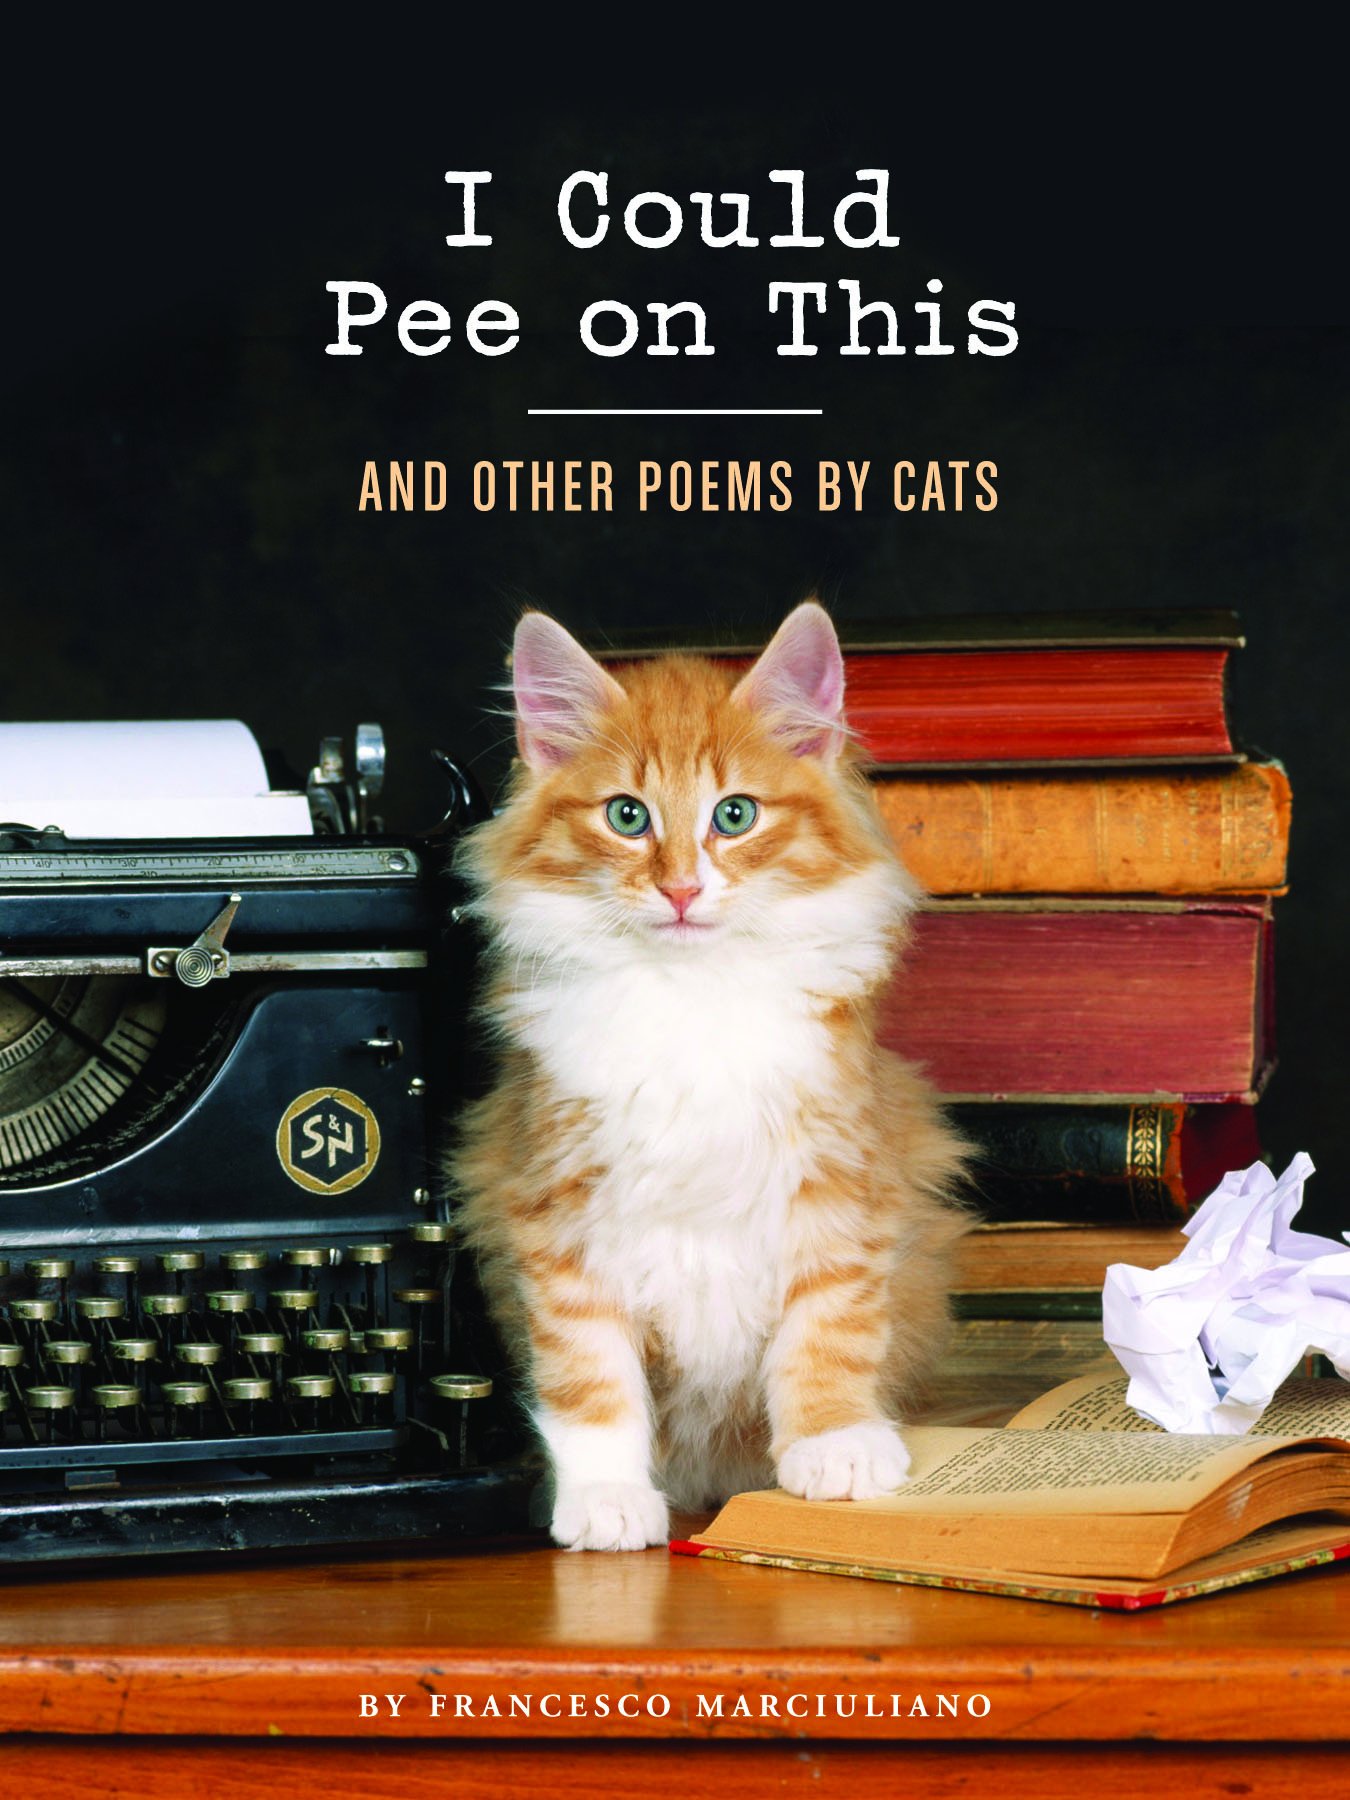 'I Could Pee on This: And Other Poems by Cats' by Francesco Marciuliano